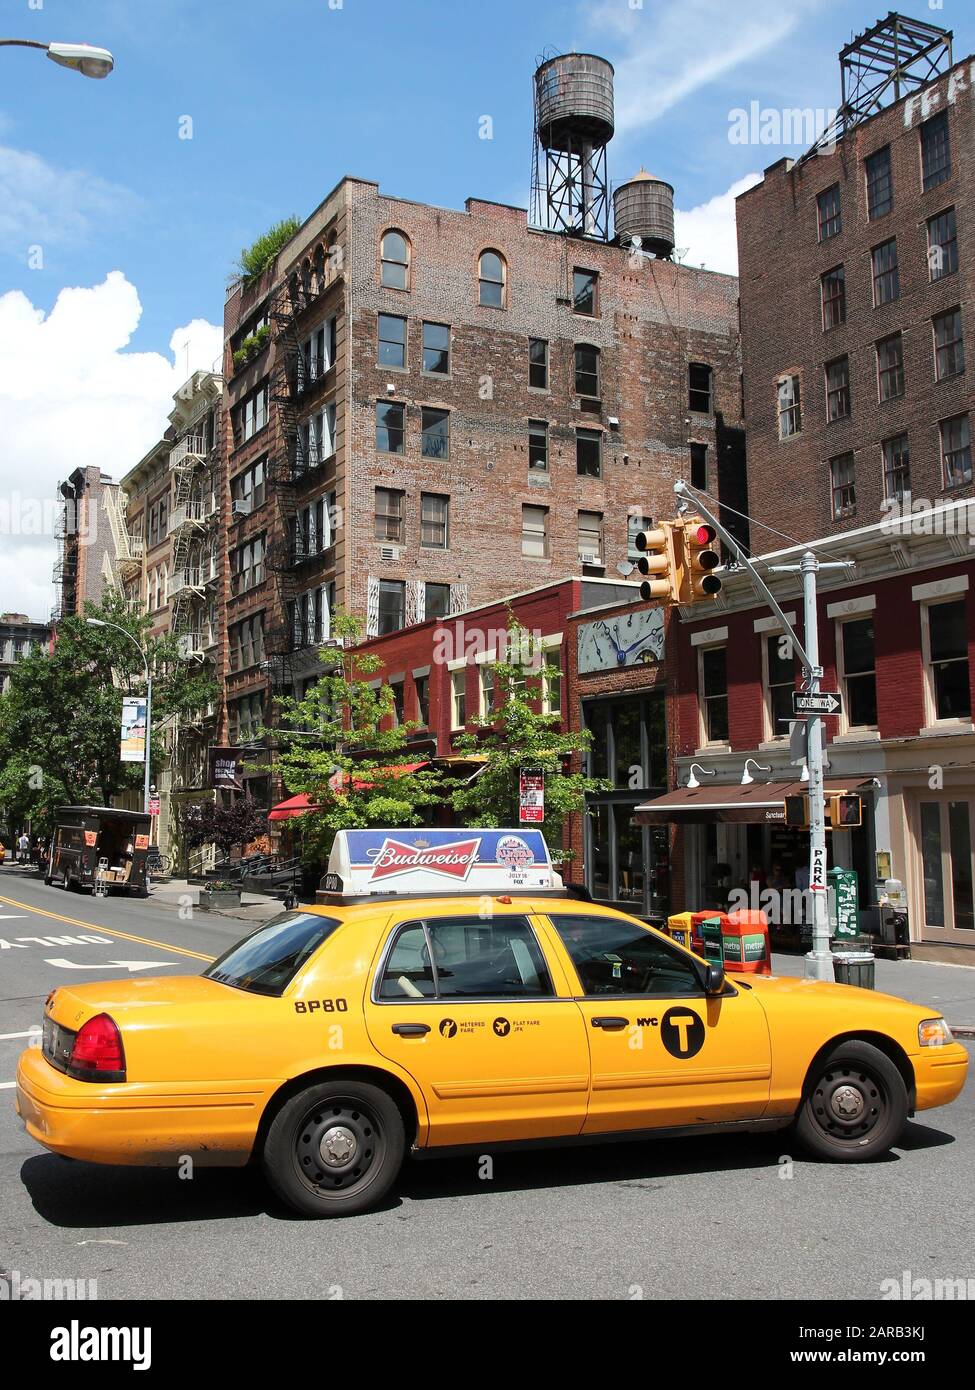 NEW YORK, USA - JULY 2, 2013: People ride yellow taxi in SoHo, New York. As of 2012 there were 13,237 yellow taxi cabs registered in New York City. Stock Photo